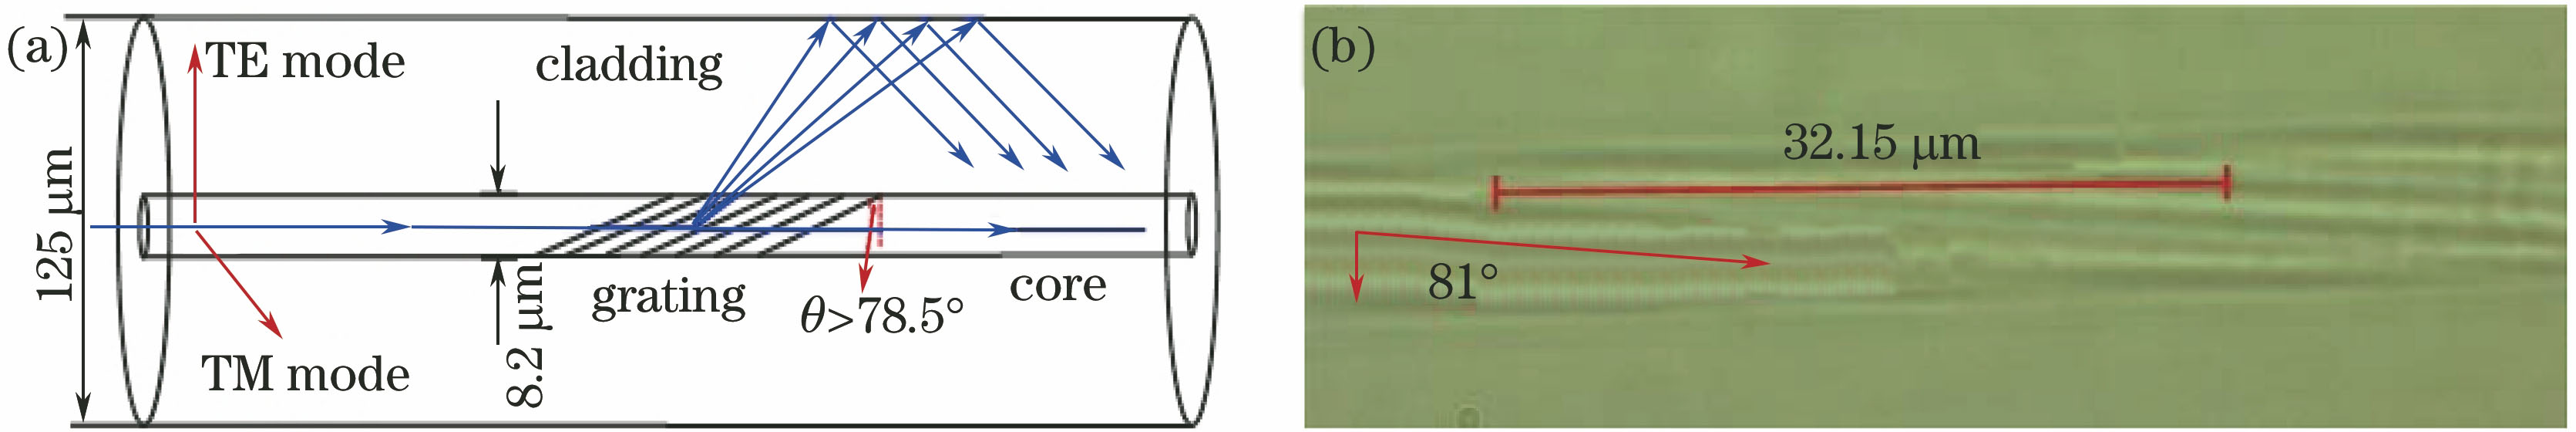 (a) Light coupling mechanism of 81°-TFG; (b)micrograph of the tilted fringe in core region of 81°-TFG